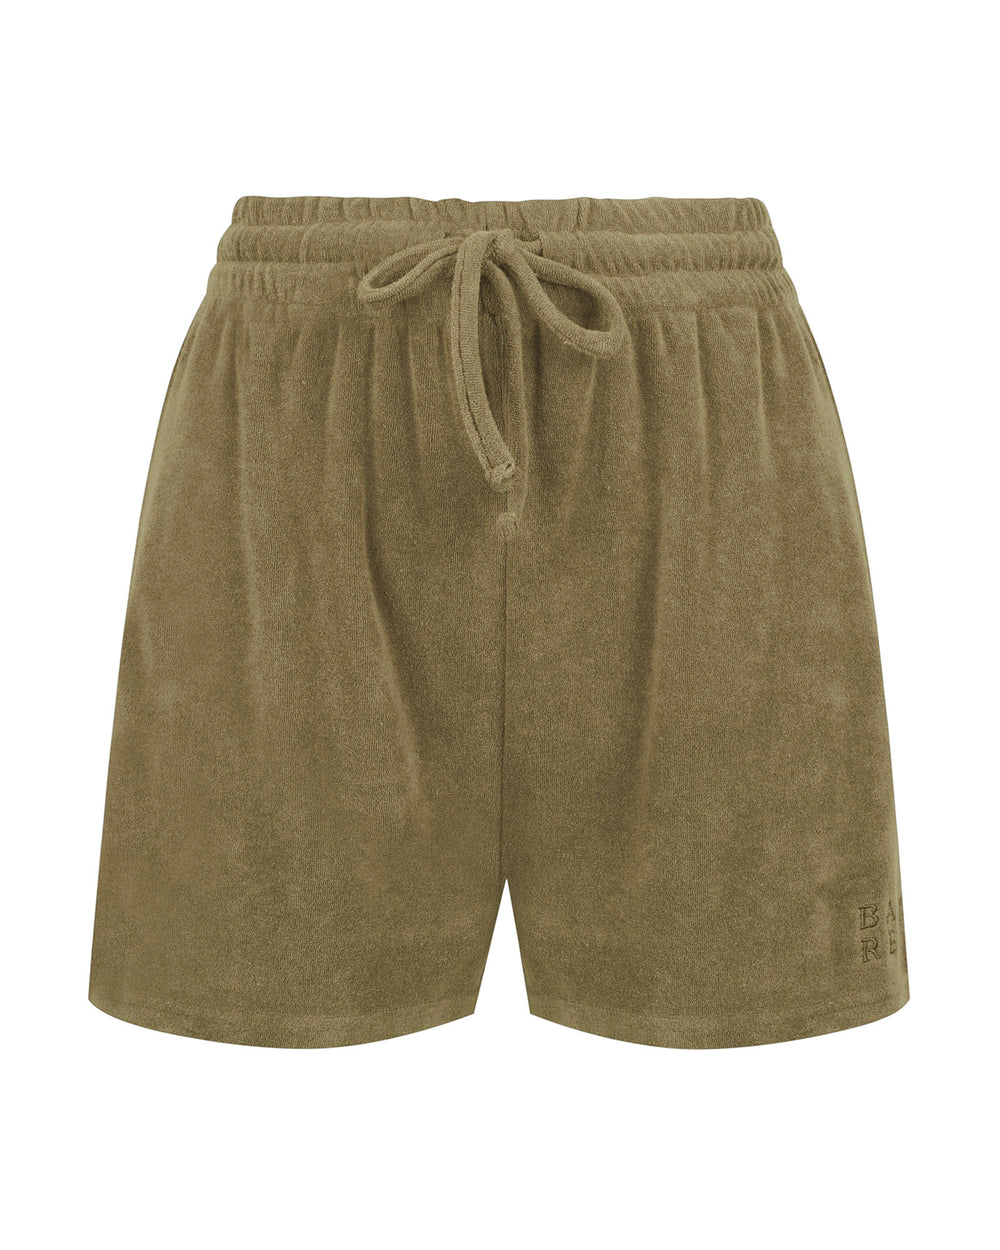 The Terry Towelling Short